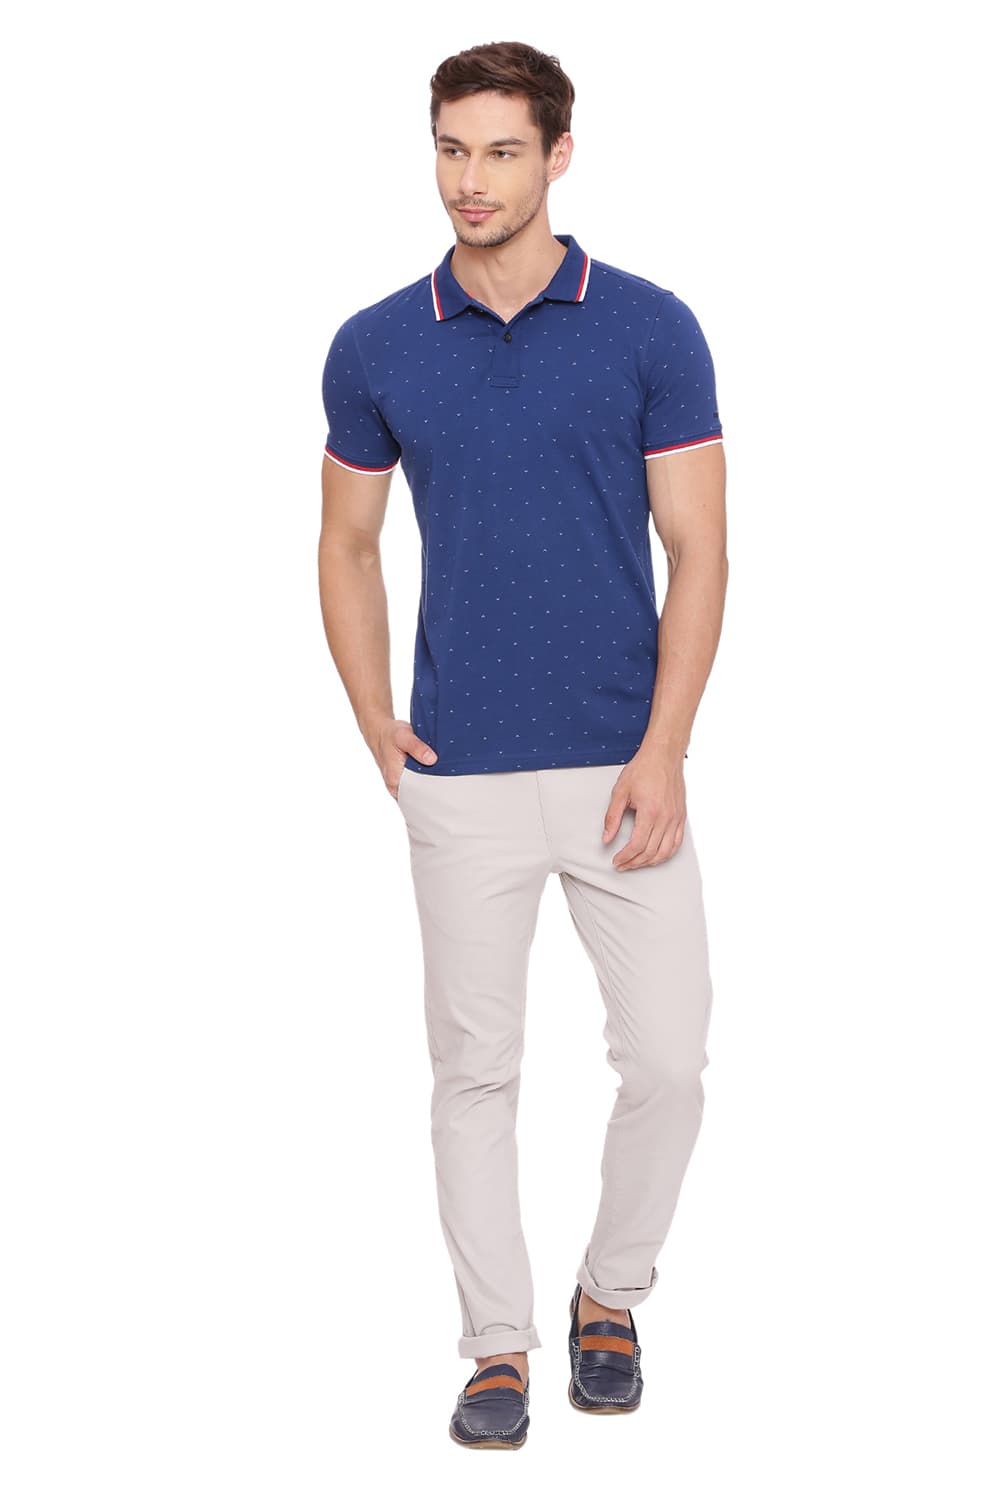 BASICS MUSCLE FIT PRINTED POLO T SHIRT